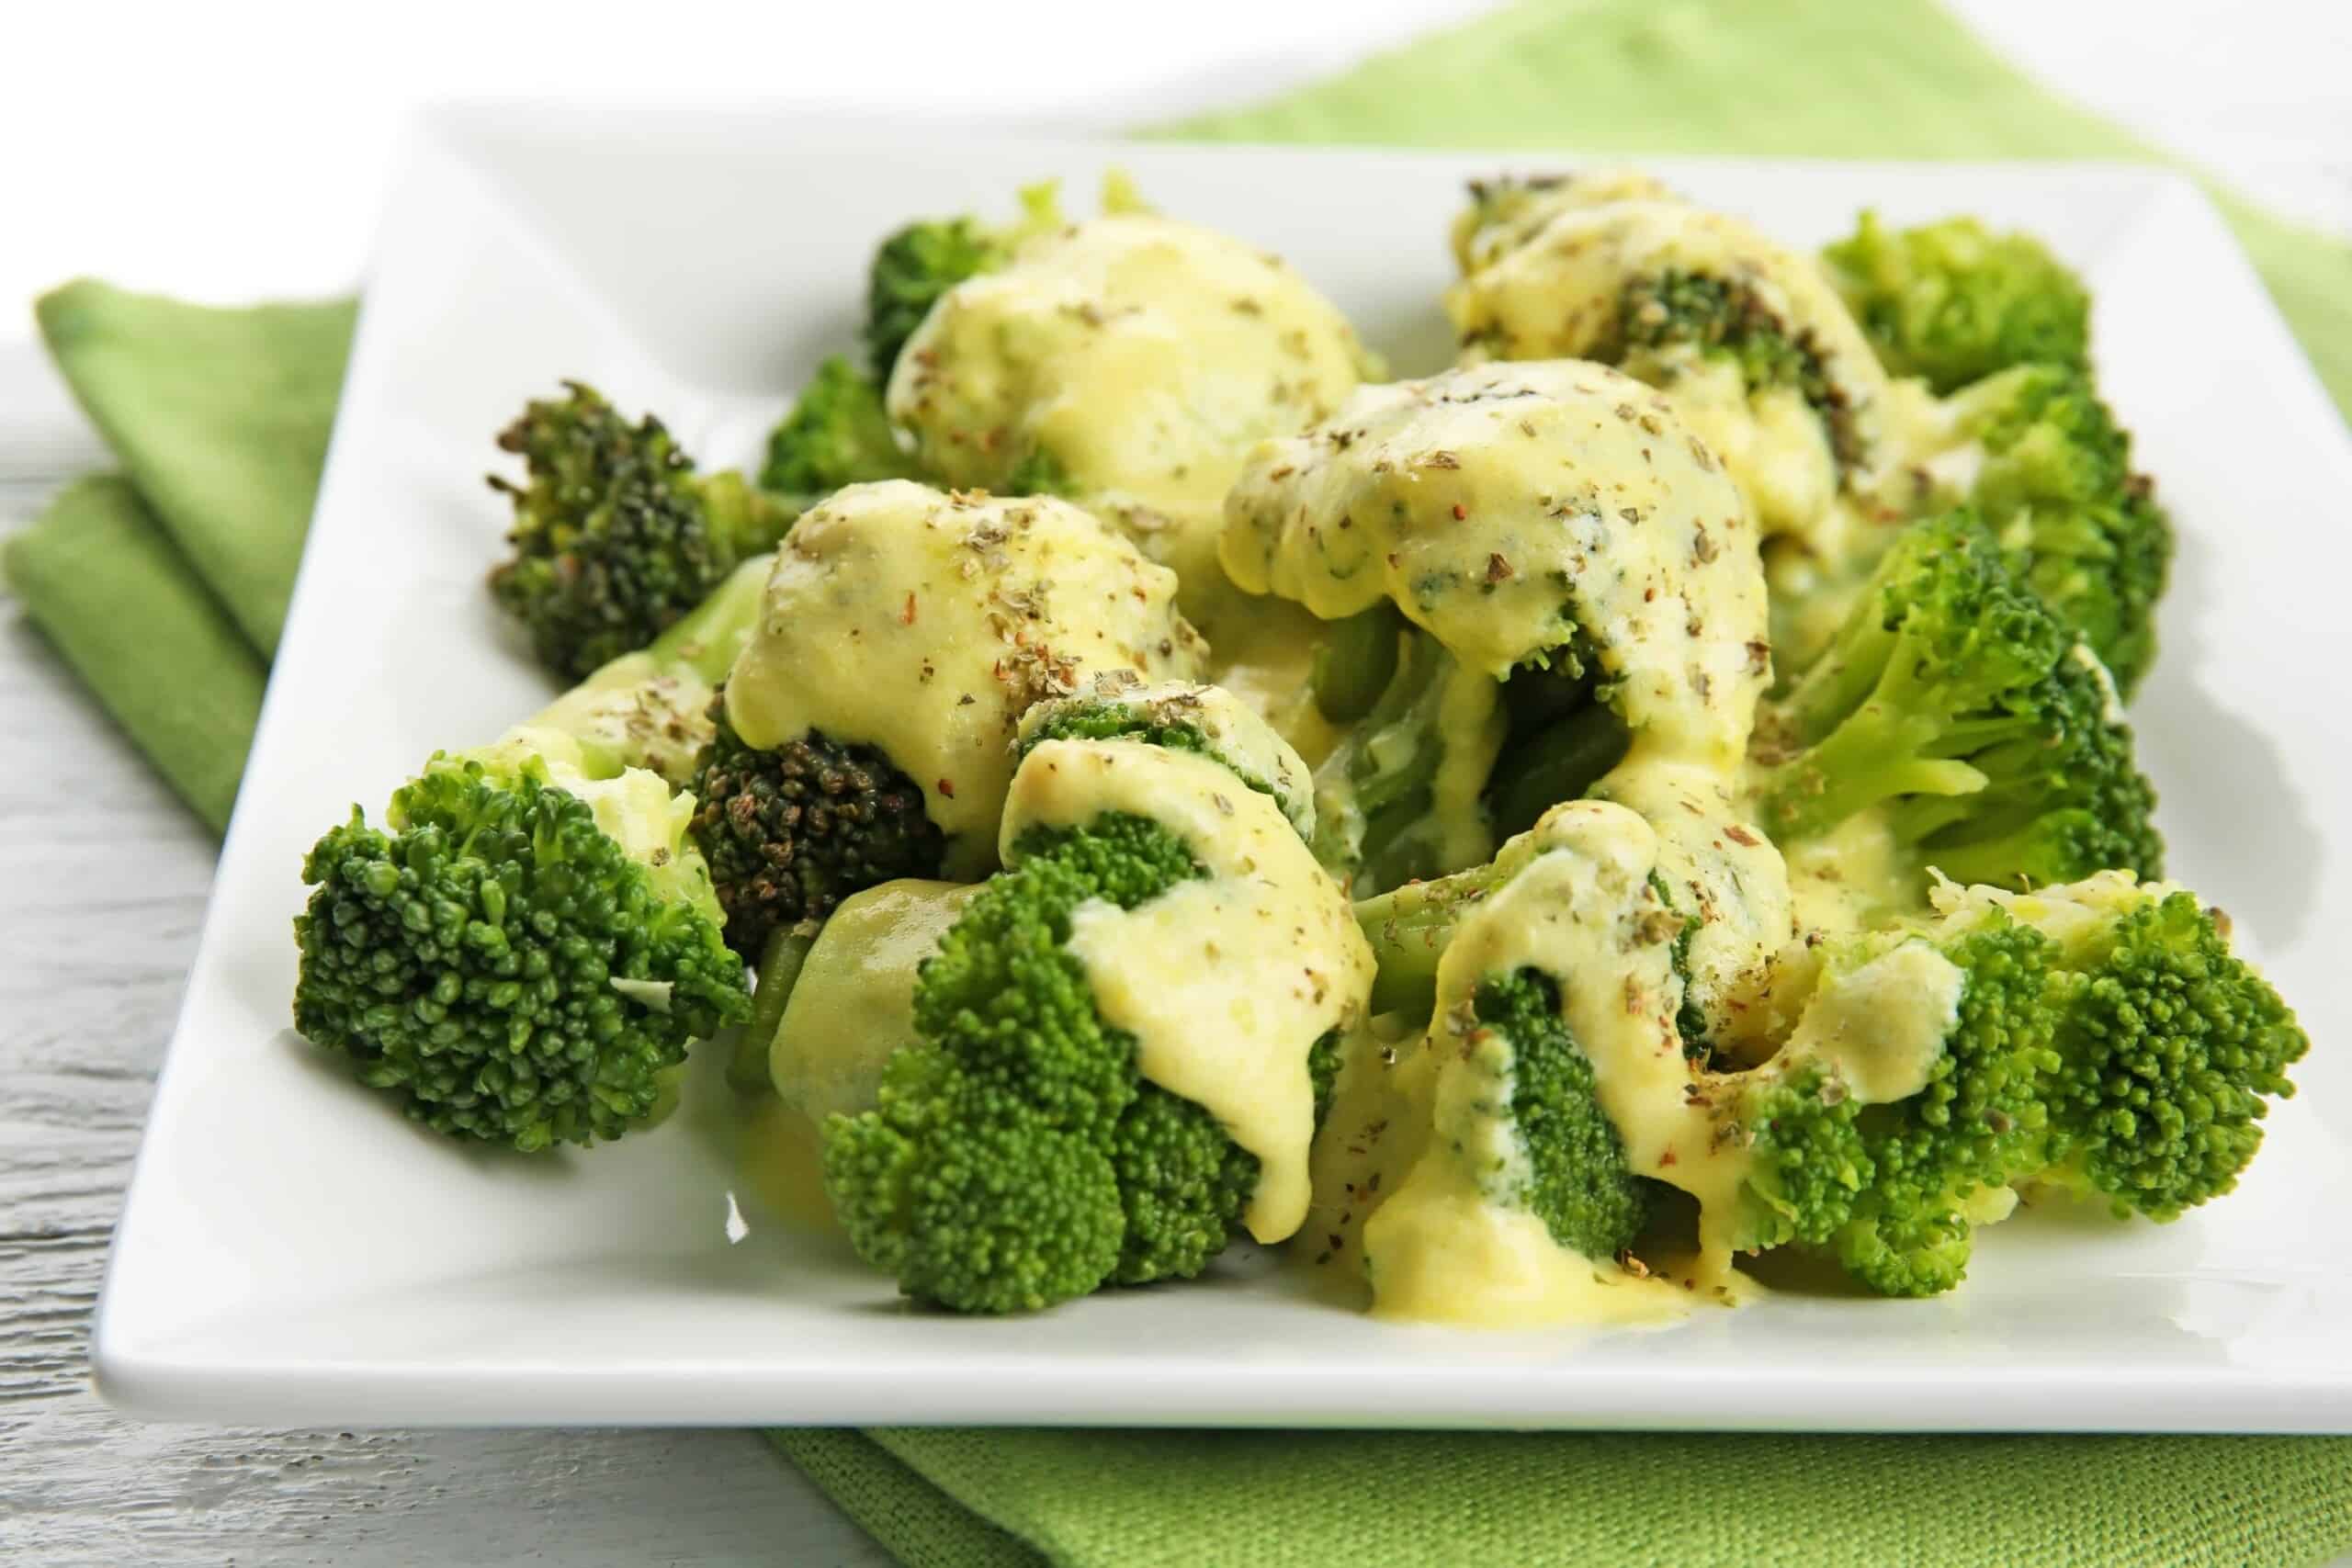 Easy after school snack for kids - Broccoli with cheese on white plate.